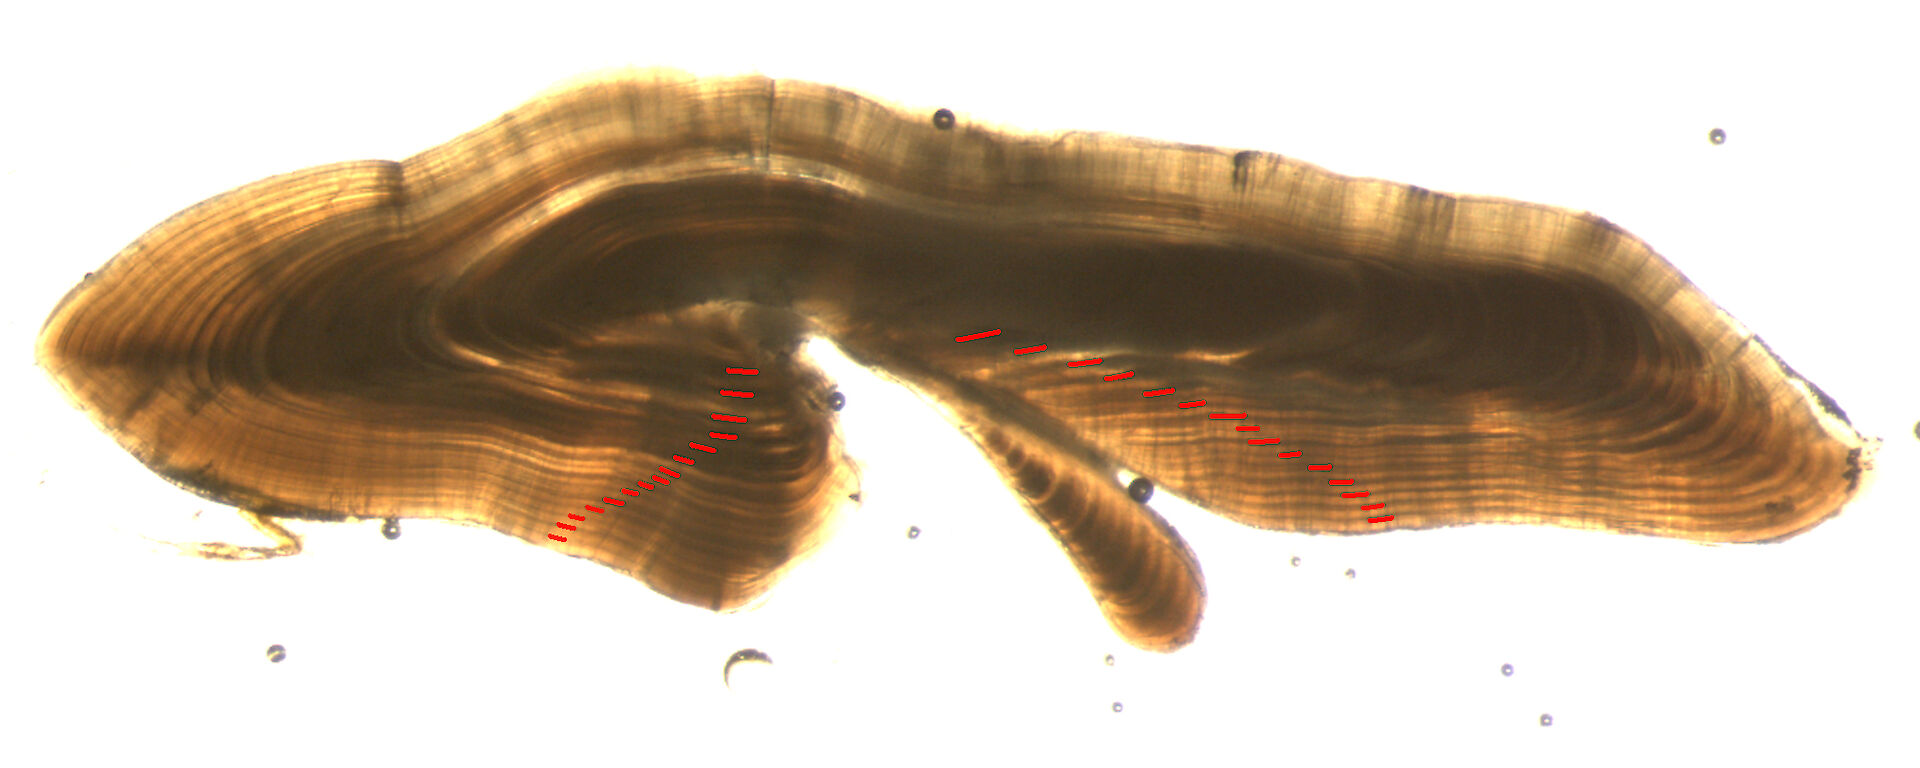 A microscopic section of a fish earbone showing the growth rings.